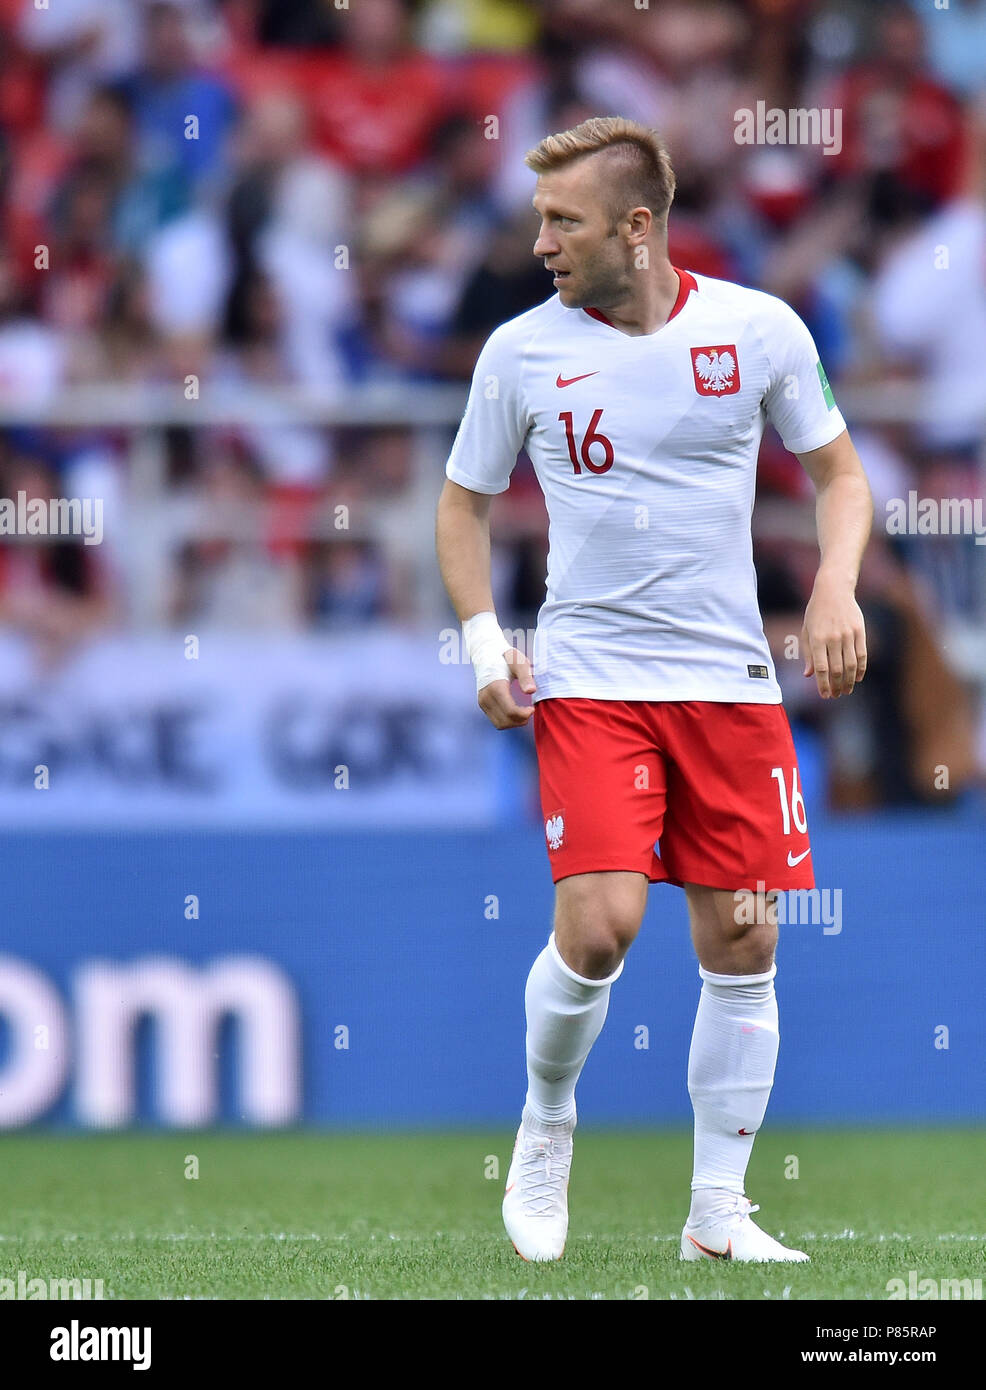 MOSCOW, RUSSIA - JUNE 19: Jakub Blaszczykowski of Poland reacts during the 2018 FIFA World Cup Russia group H match between Poland and Senegal at Spartak Stadium on June 19, 2018 in Moscow, Russia. (Photo by Lukasz Laskowski/PressFocus/MB Media) Stock Photo